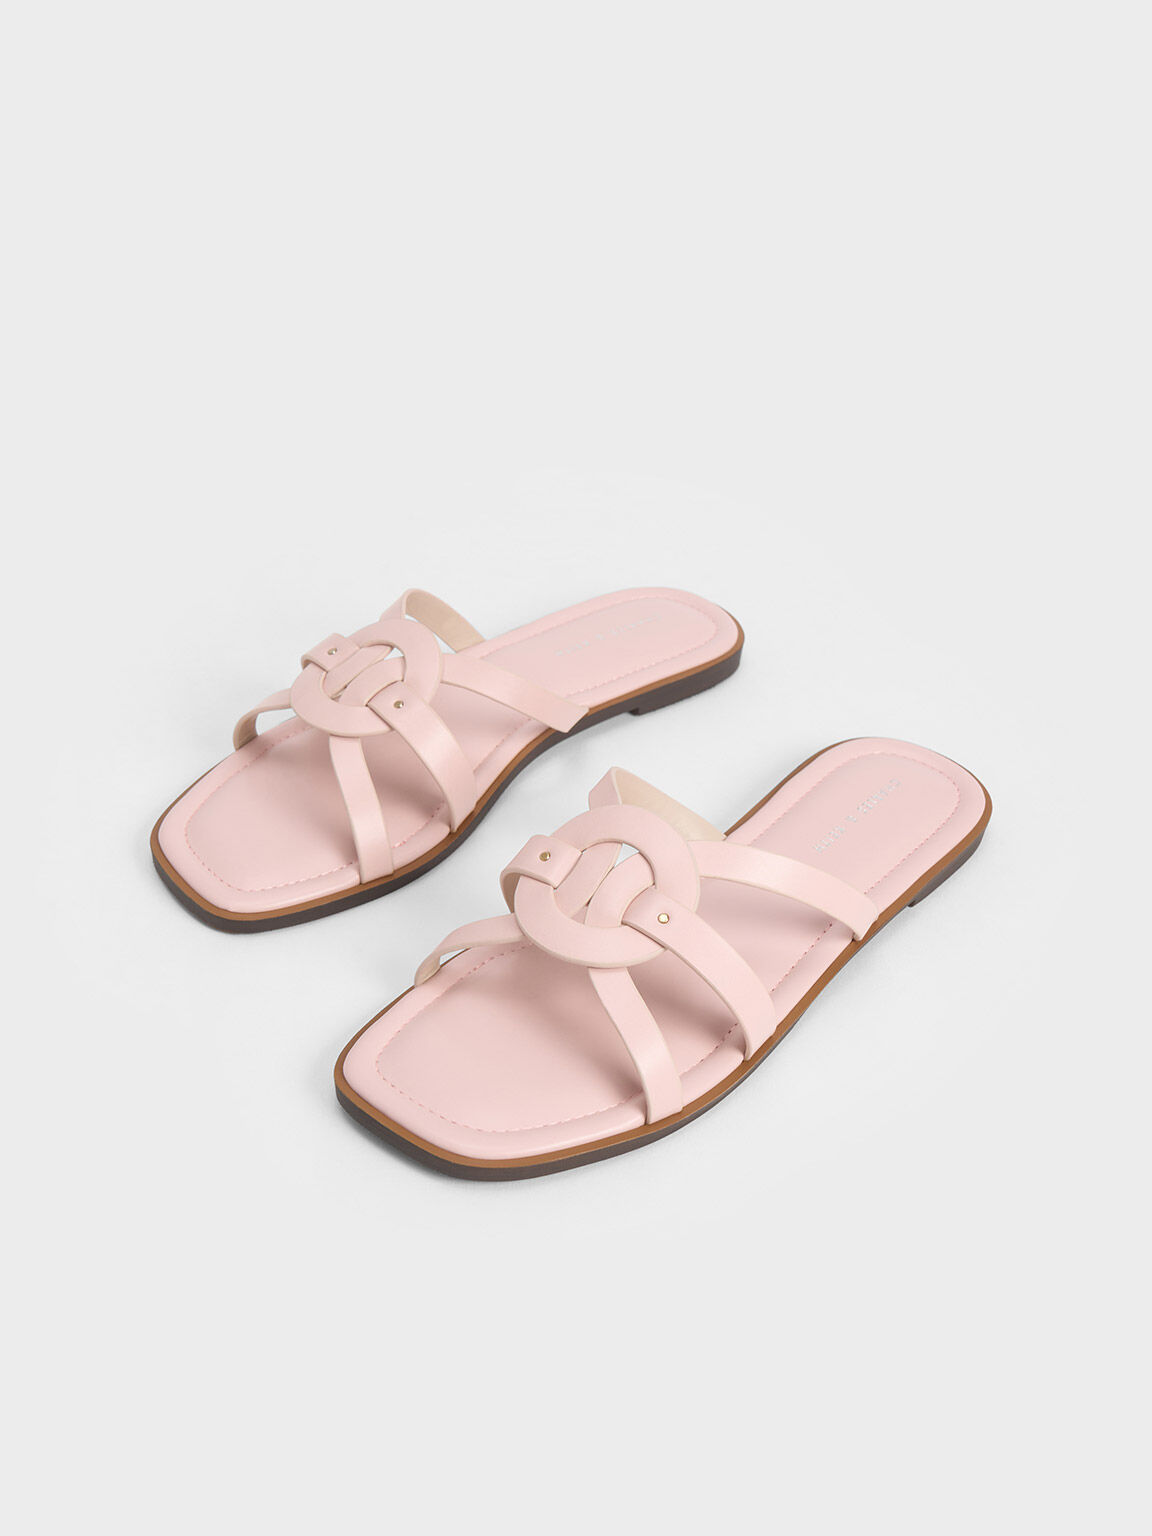 Ring Detail Strappy Flats, Light Pink, hi-res